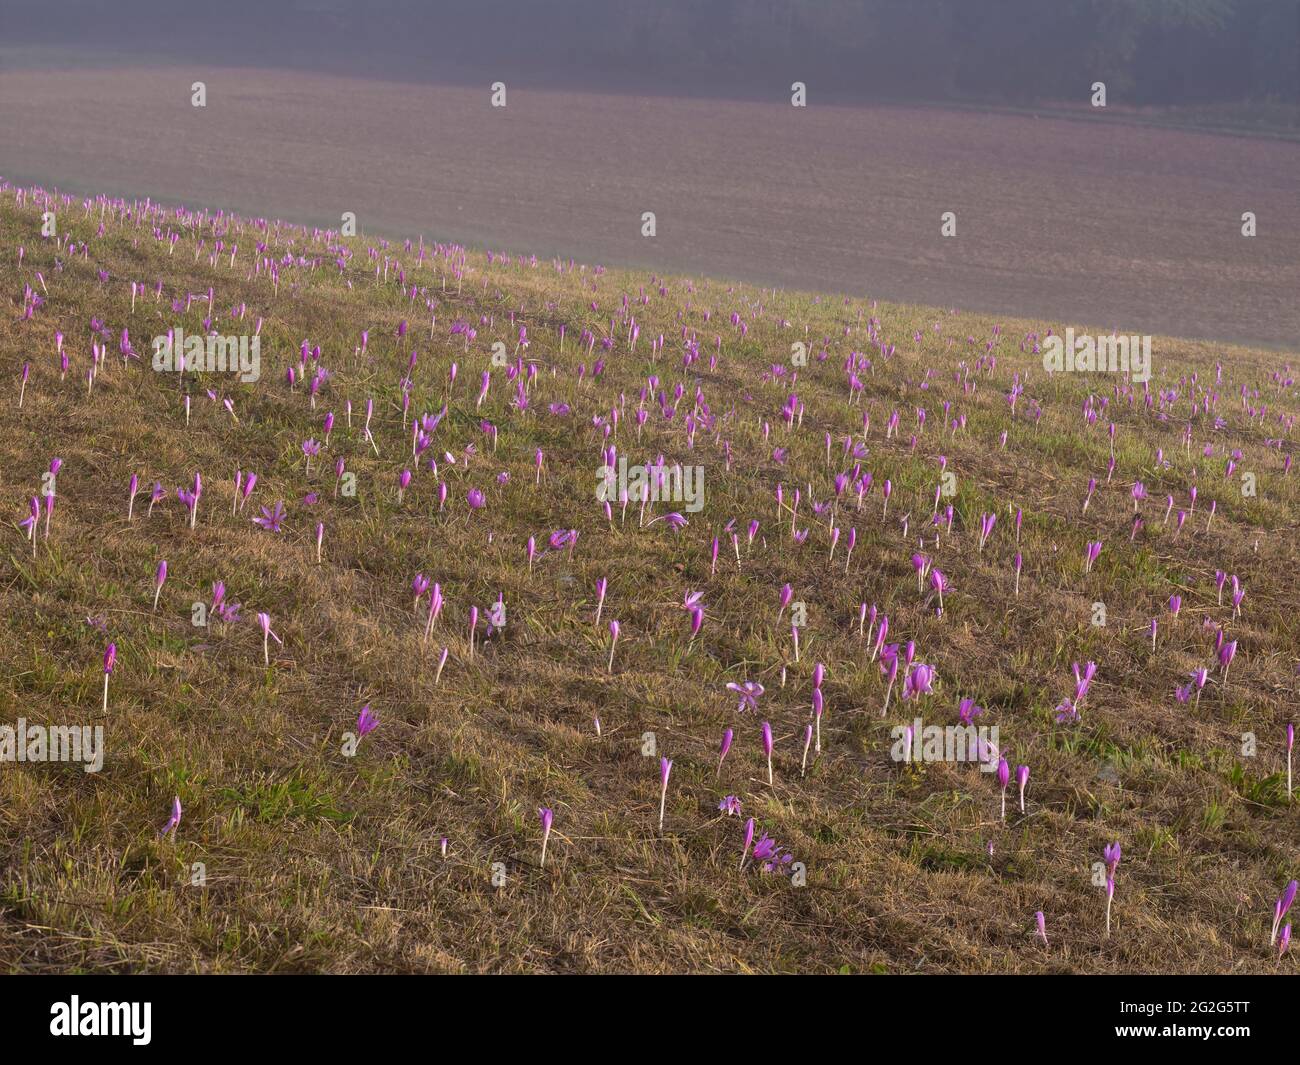 Europe, Germany, Hesse, hinterland, Lahn-Dill-Bergland nature park, Gladenbach, meadow with blooming autumn crocus Stock Photo